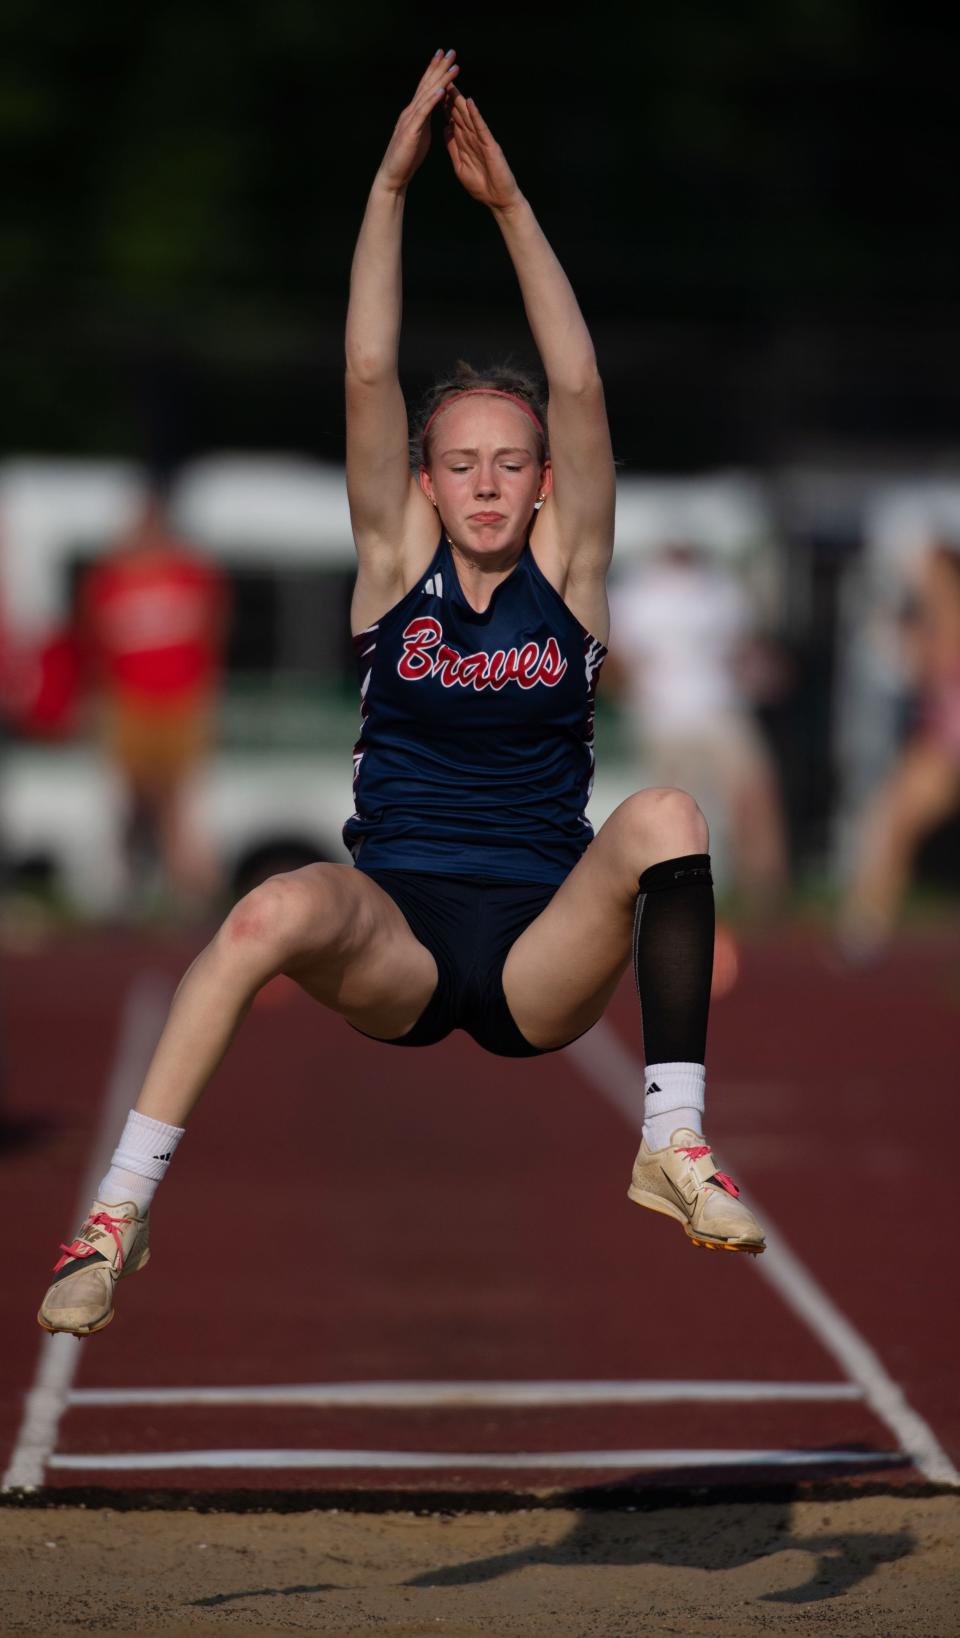 Tecumseh's Ava Kissel competes in the long jump during the IHSAA Girls Regional 8 Track & Field Meet at Central Stadium Tuesday evening, May 23, 2023. She placed third with a longest attempt at 17' 5 1/2".